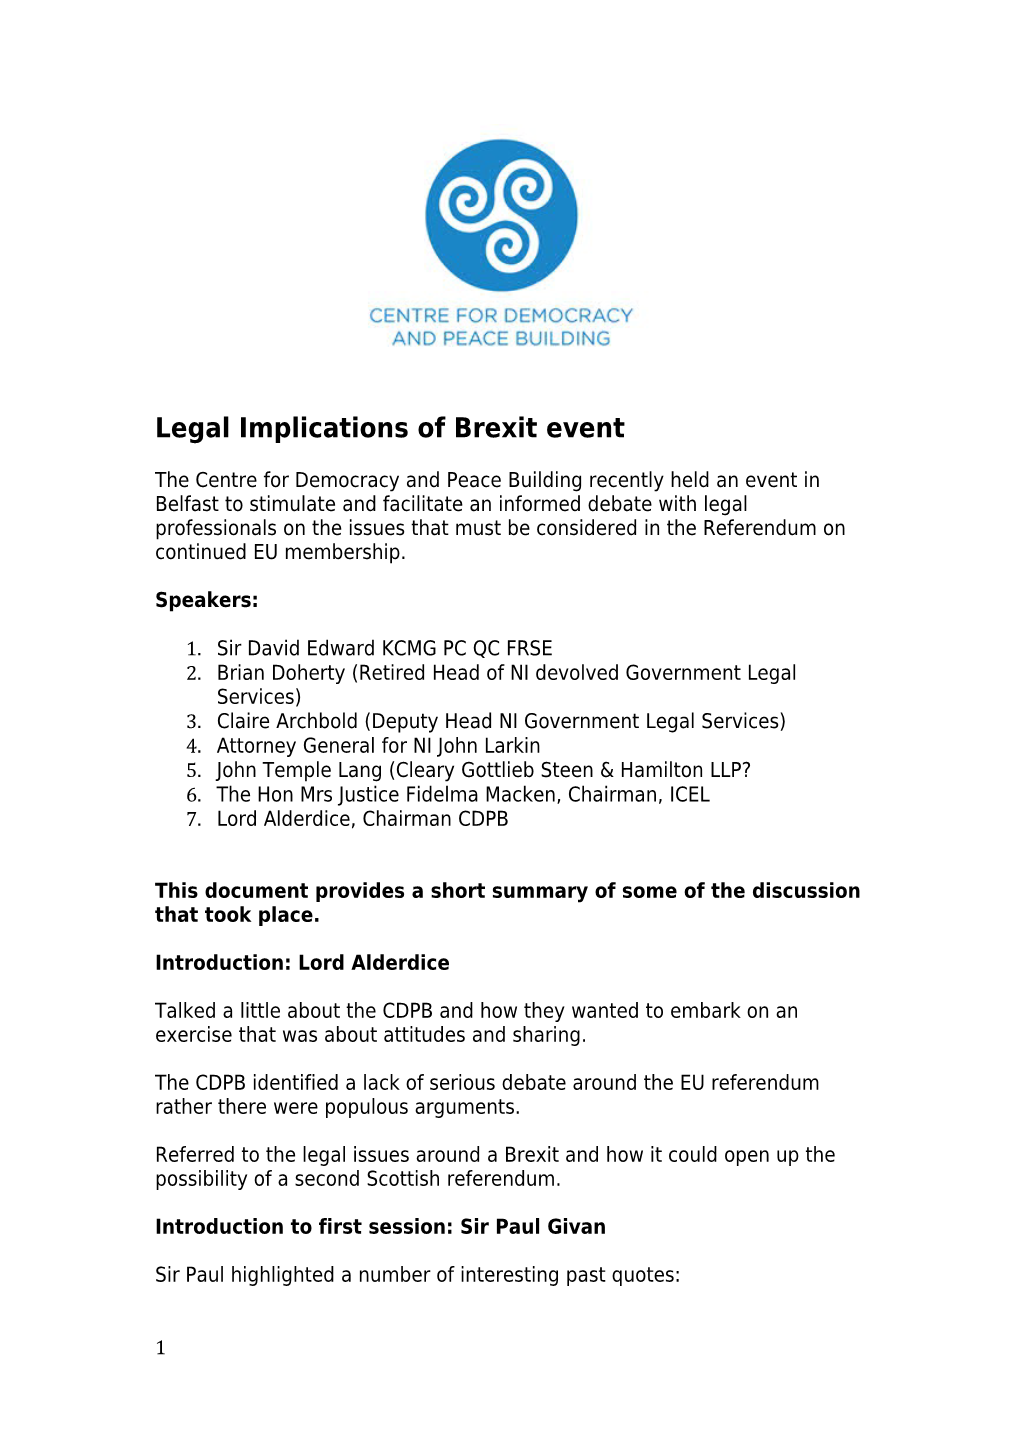 Legal Implications of Brexit Event